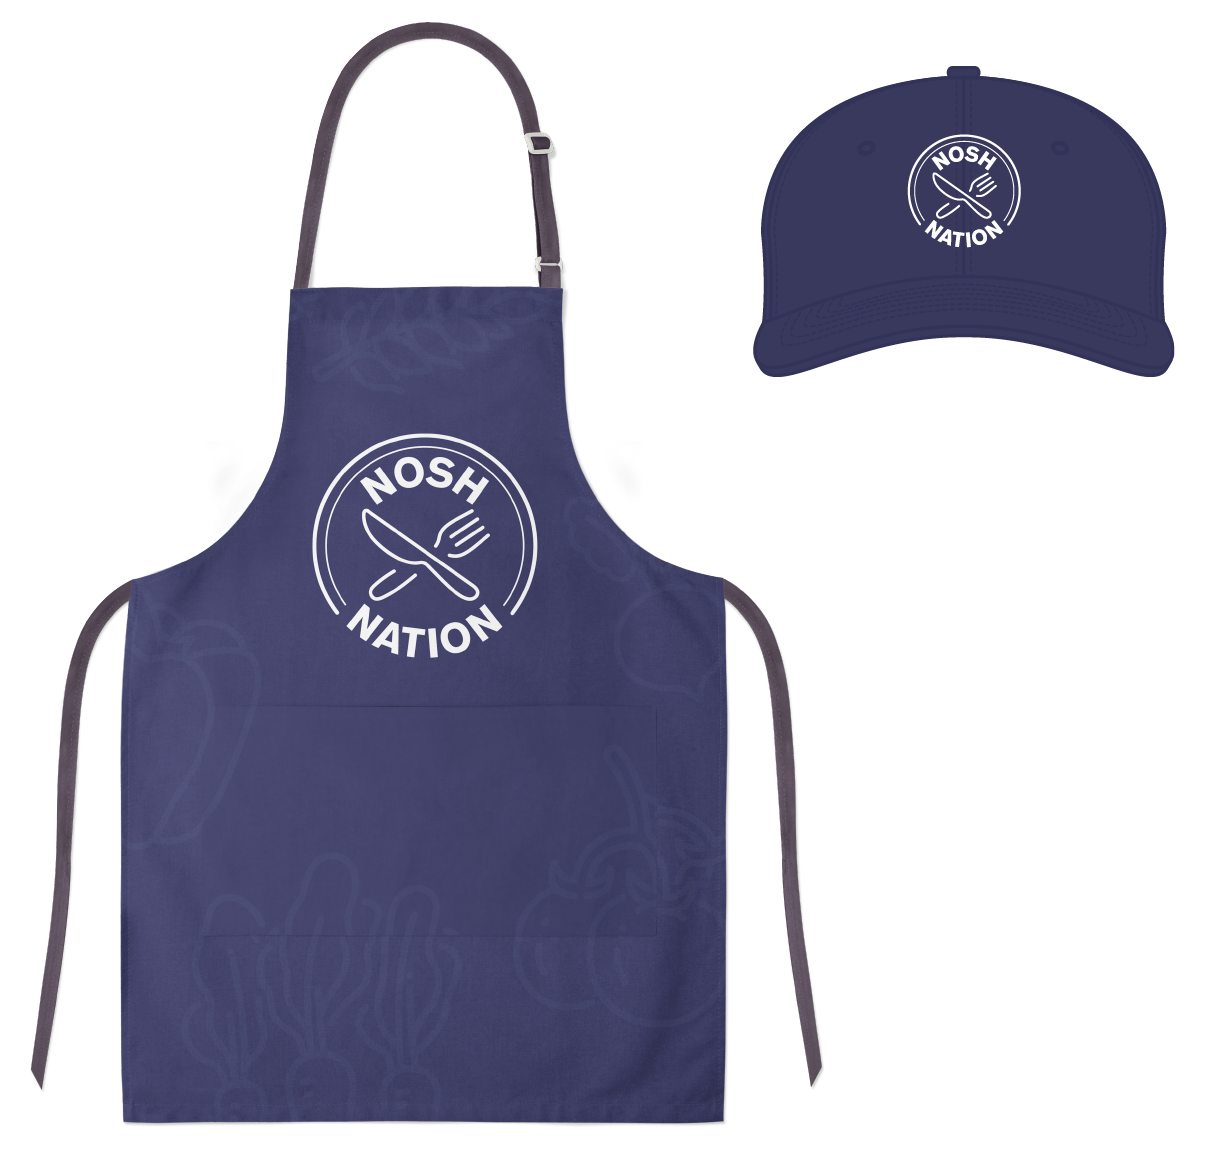 An apron and a cap in purple with the Nosh Nation logo in white on them